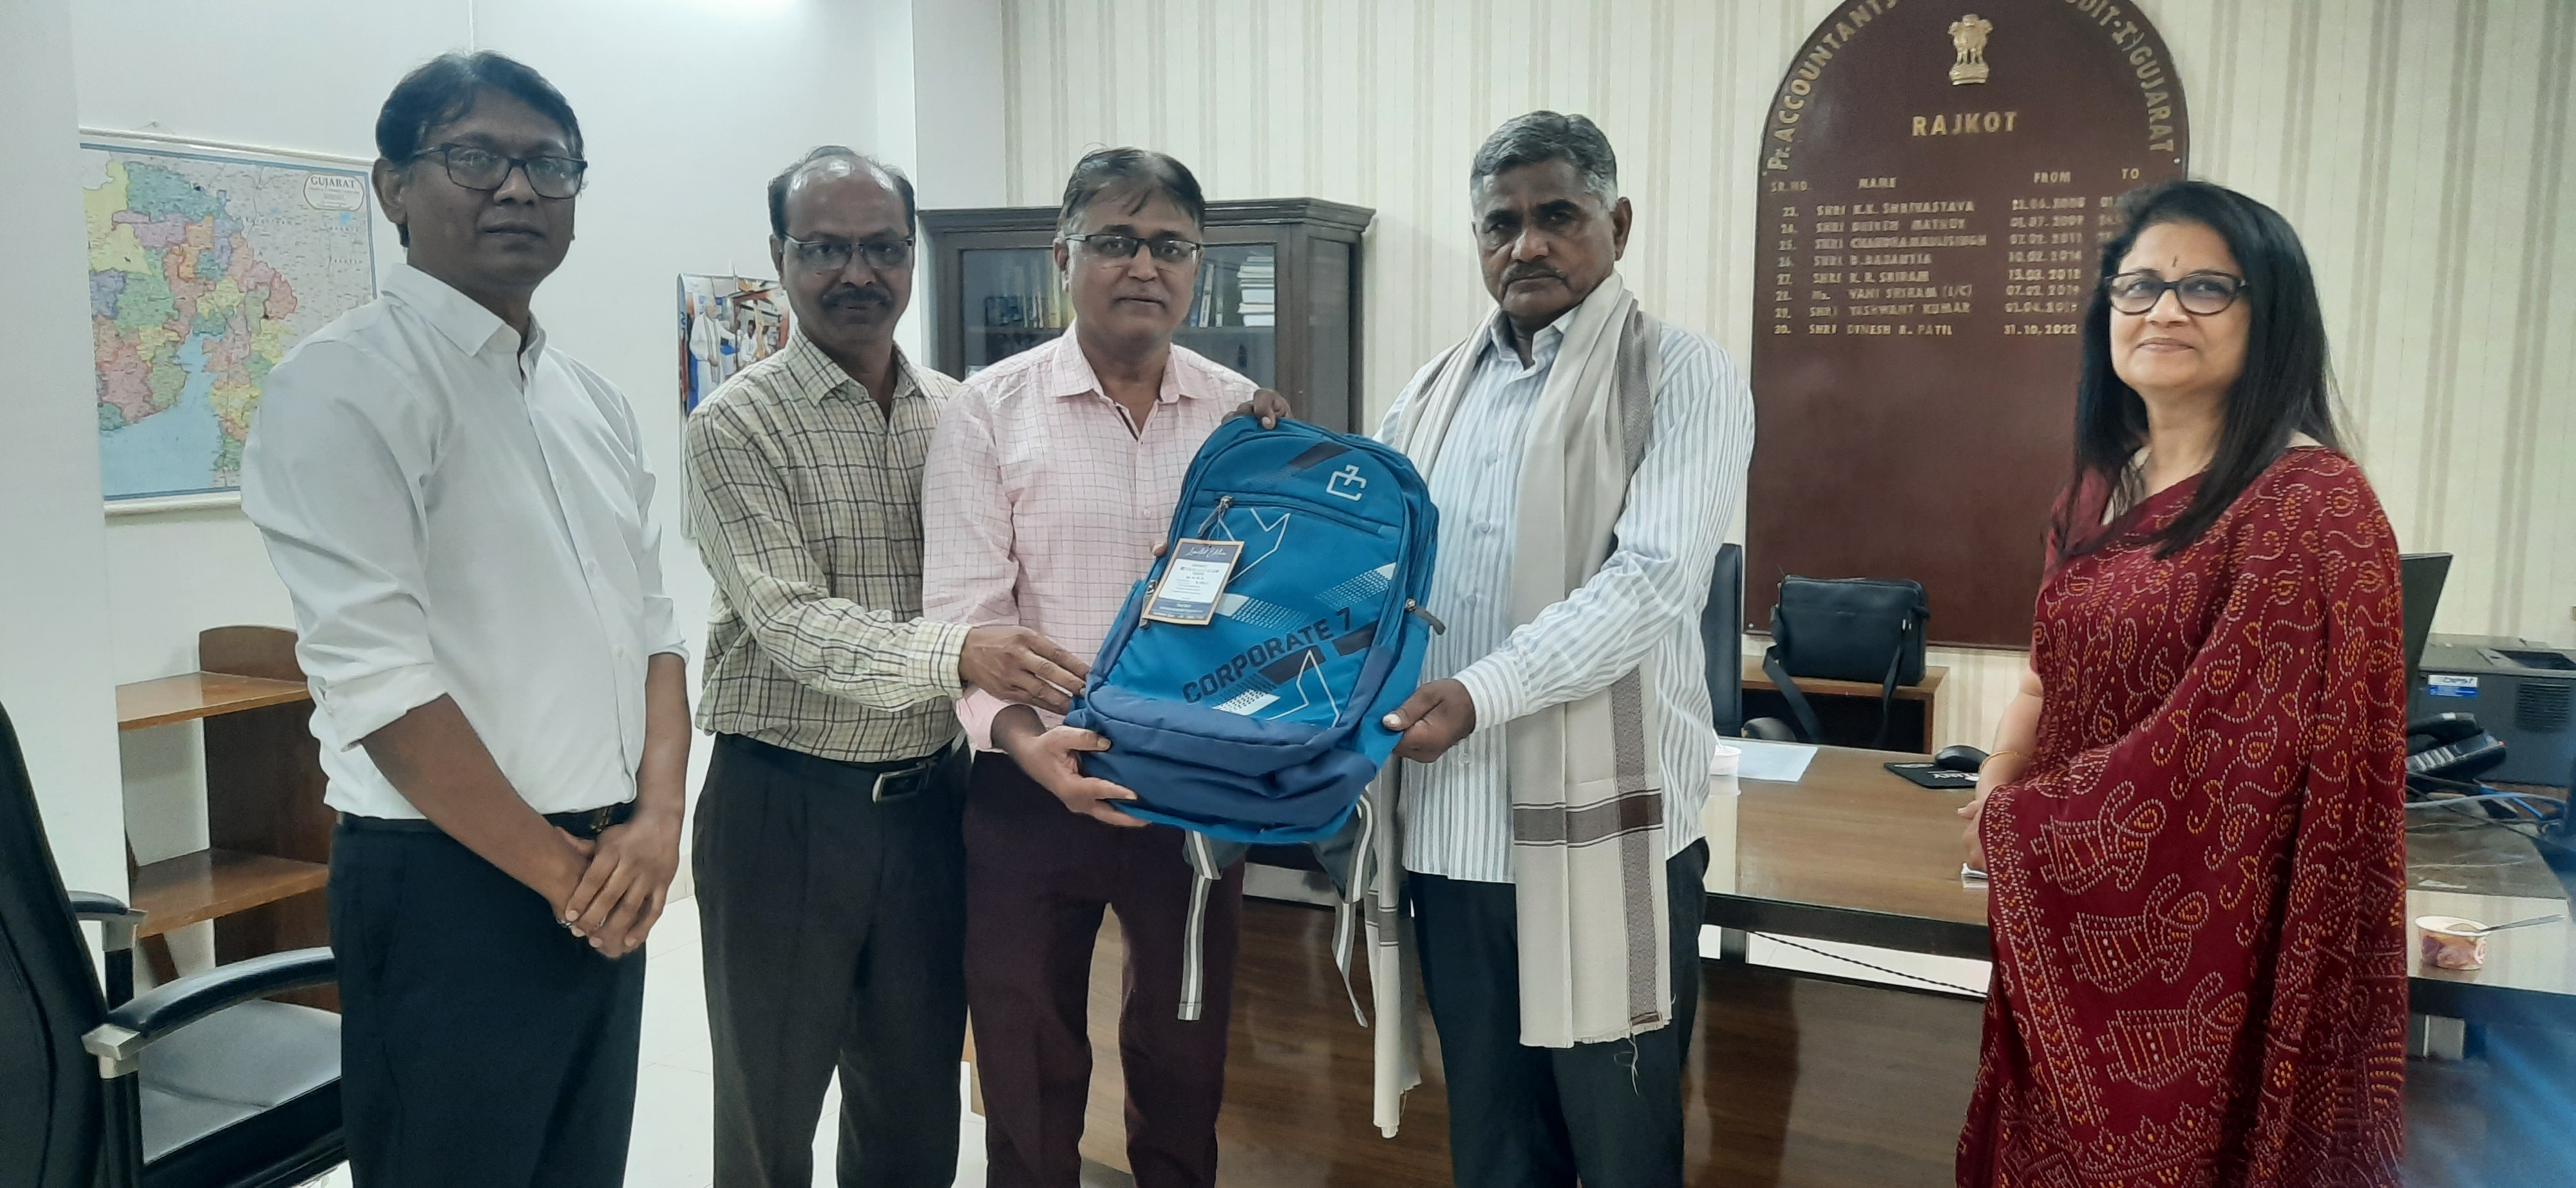 Prize distributed by Sr. Audit Officer in presence of Pr. Accountant General and Dy. Accountant General